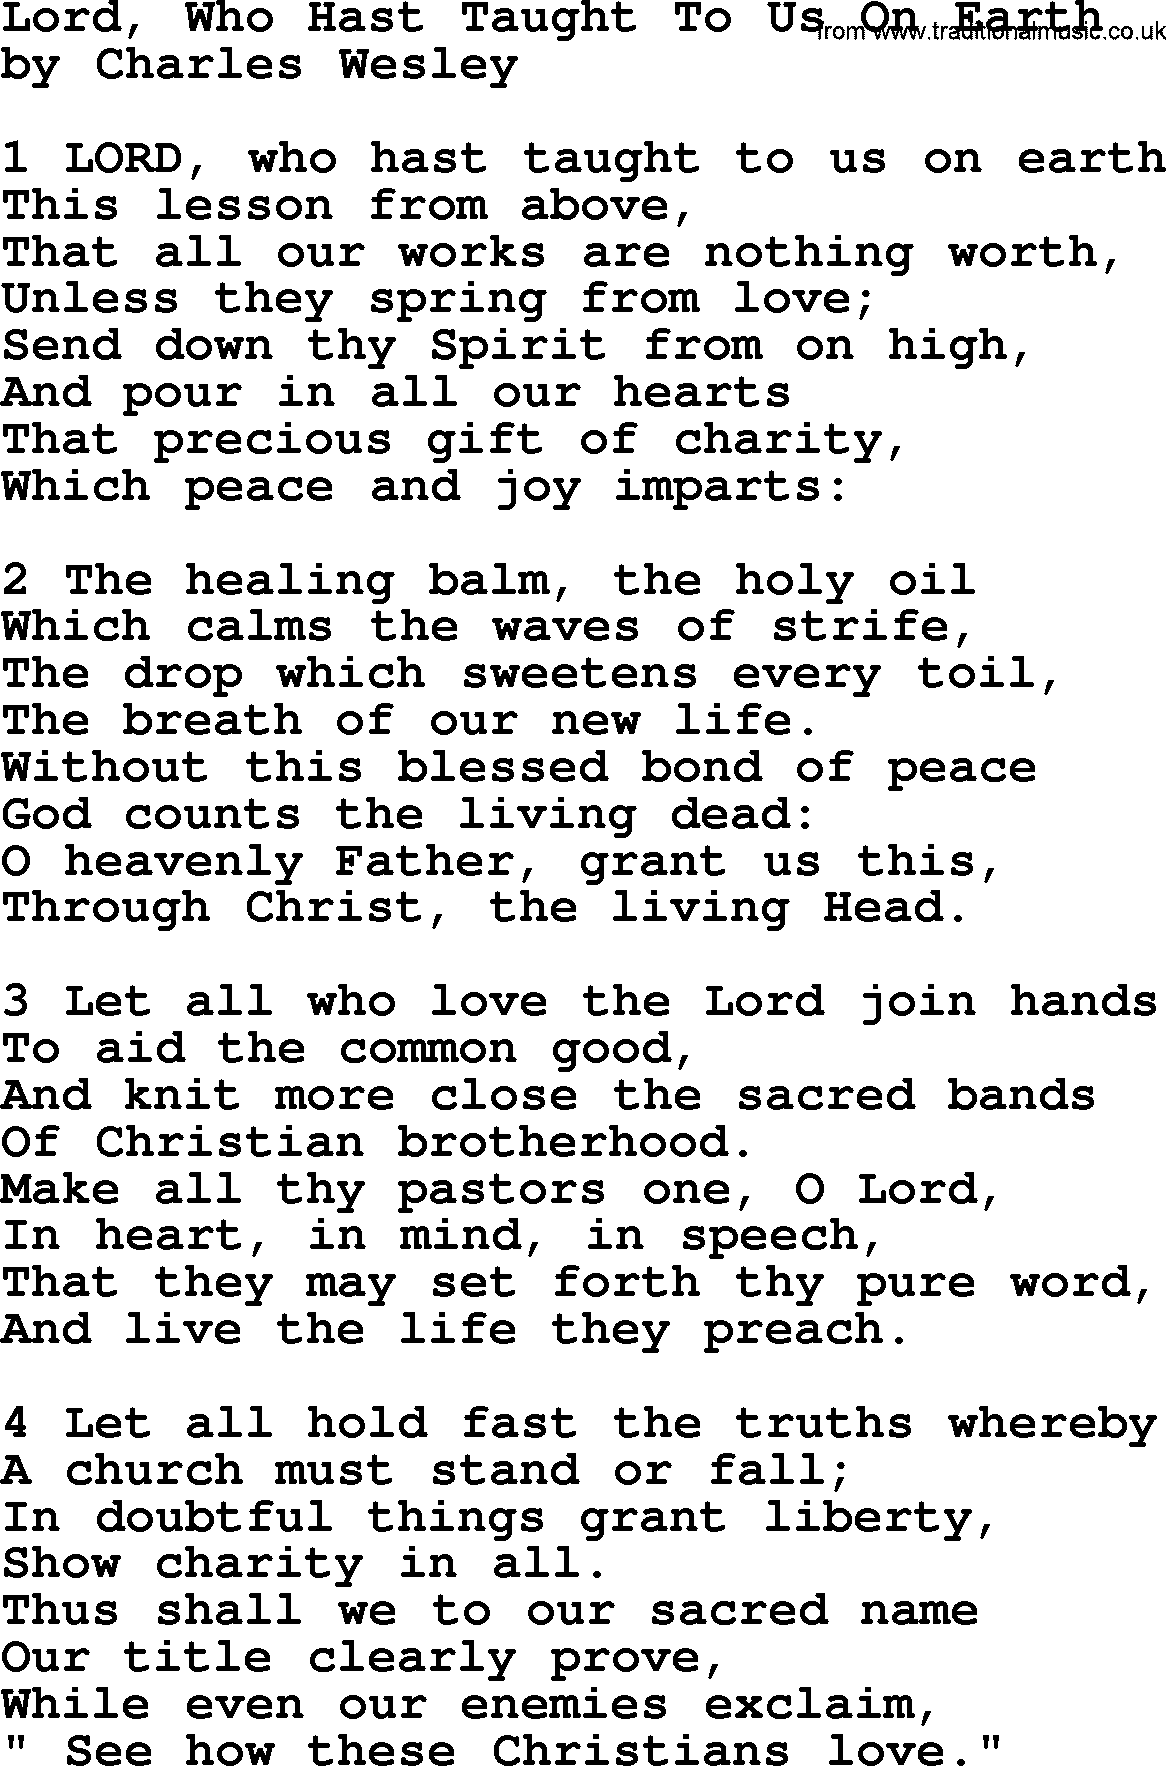 Charles Wesley hymn: Lord, Who Hast Taught To Us On Earth, lyrics